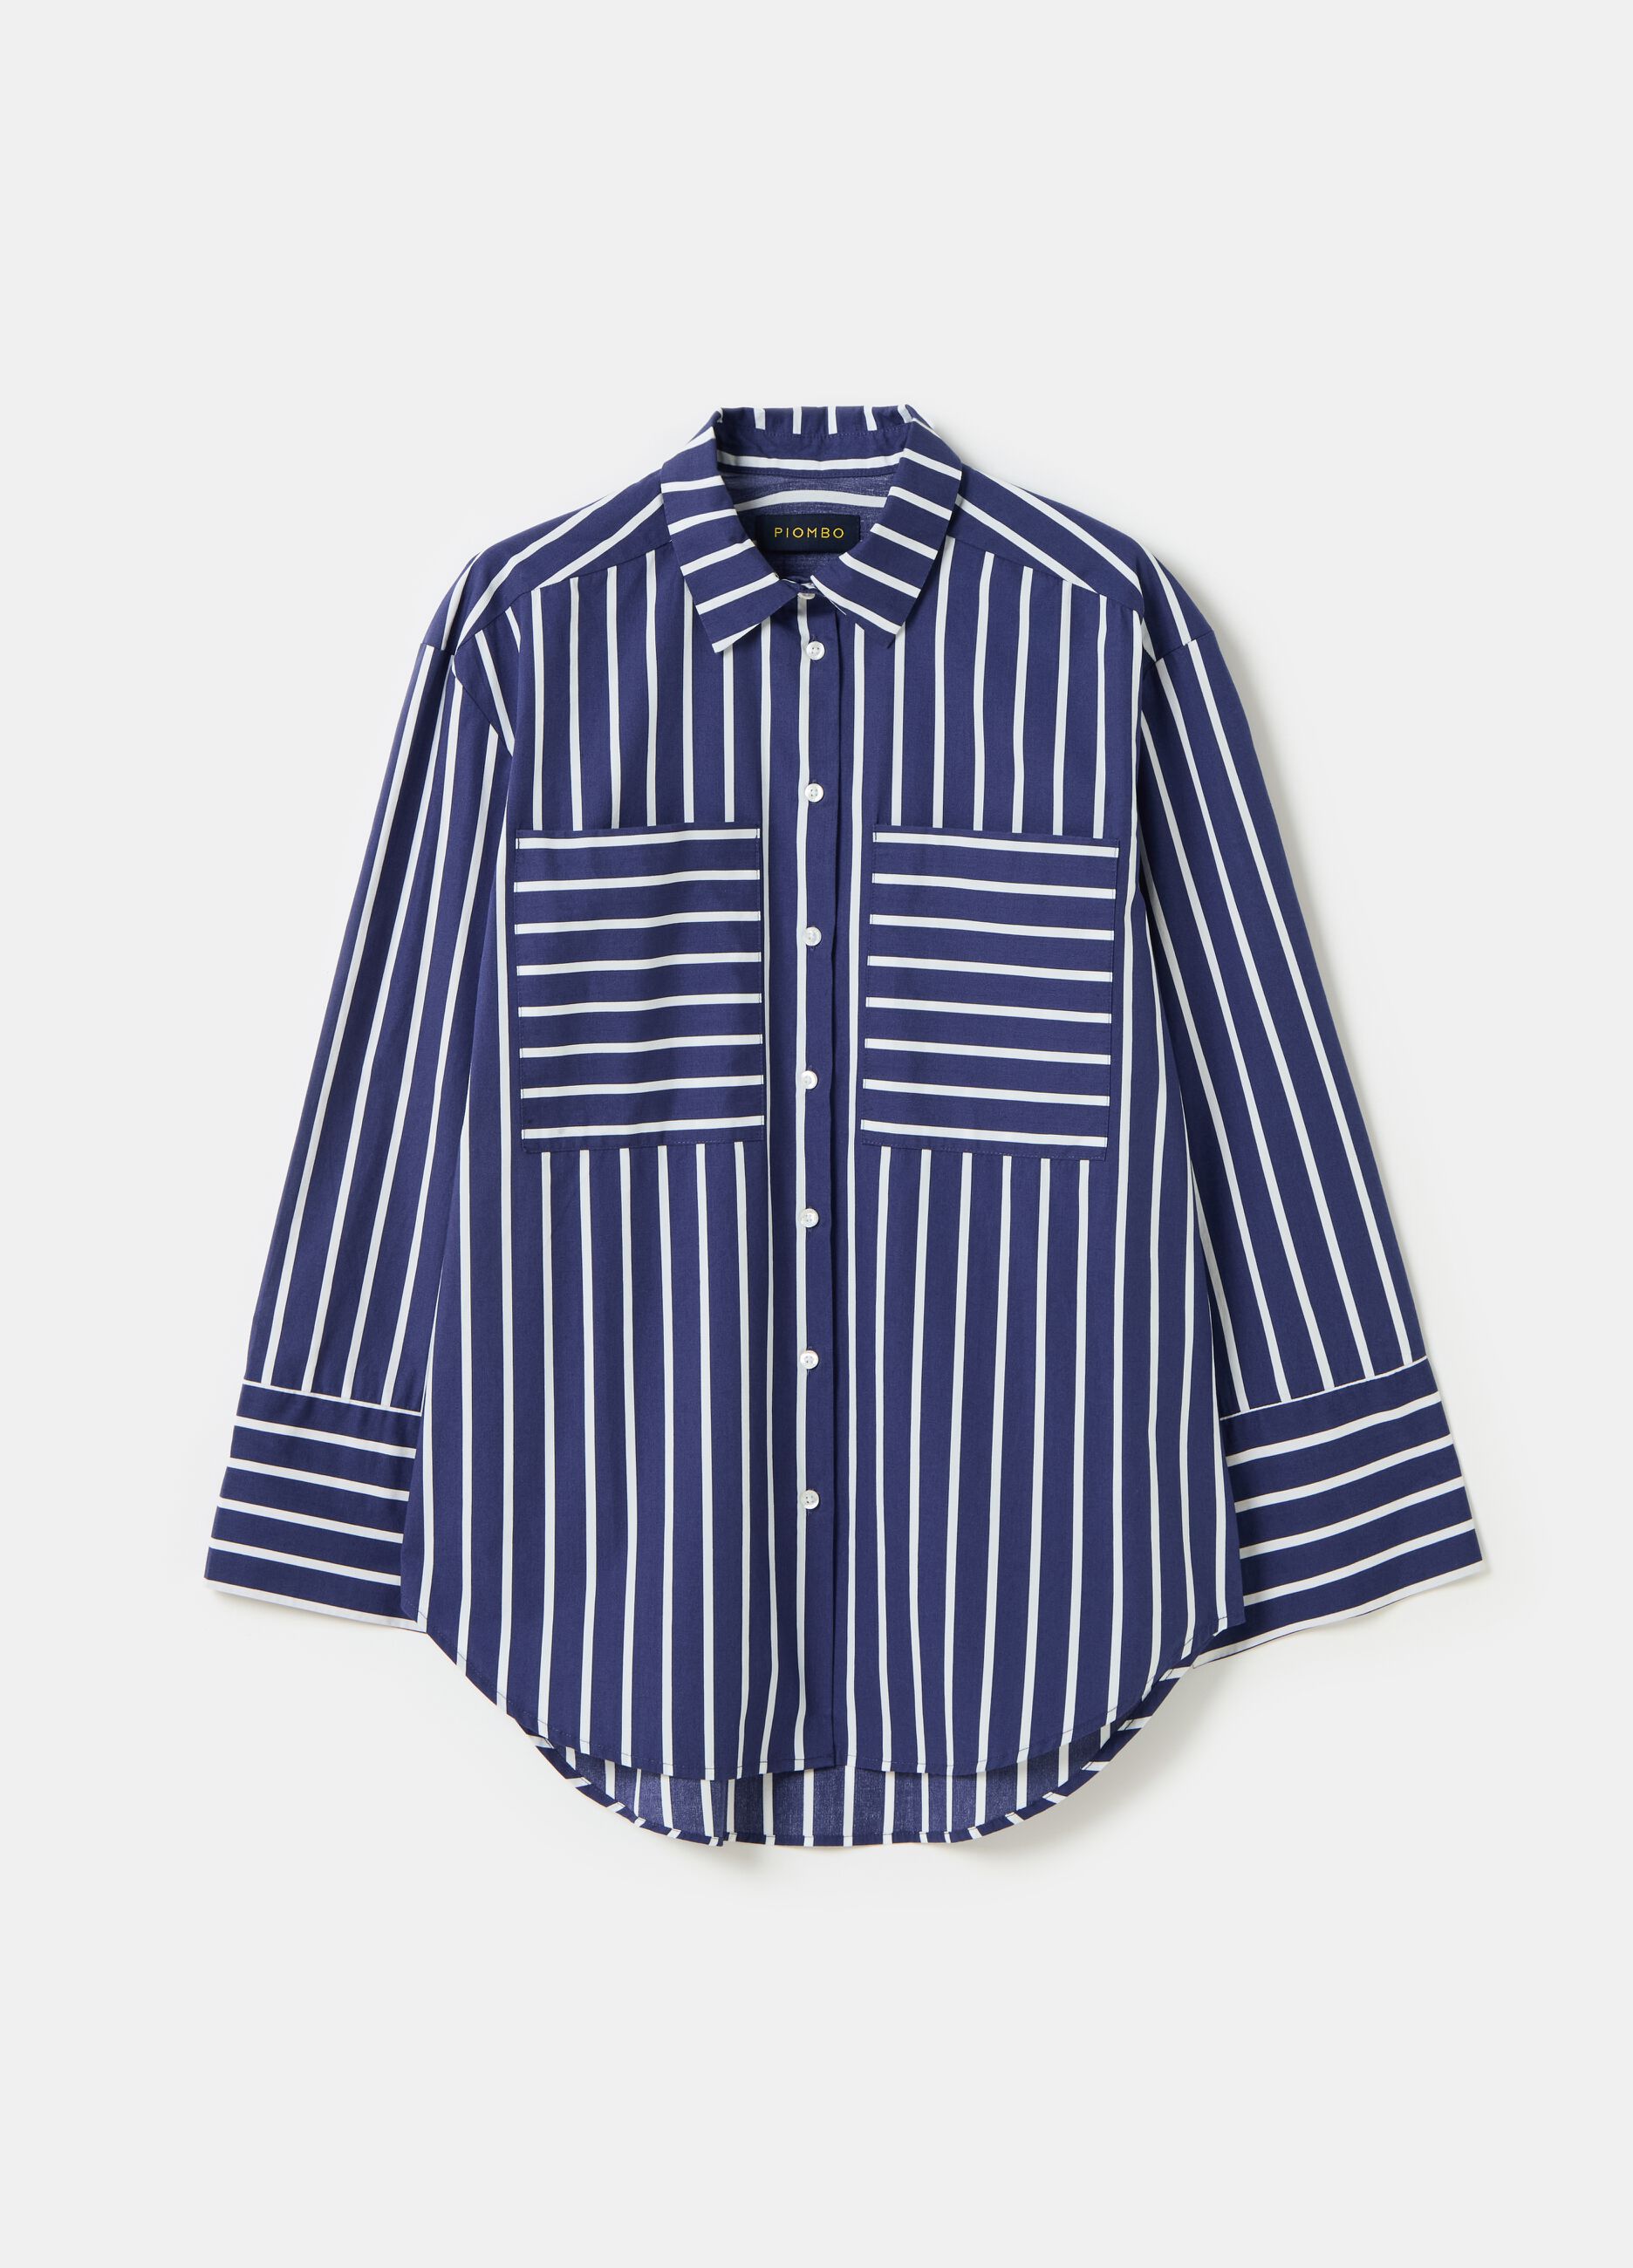 Striped shirt with pockets